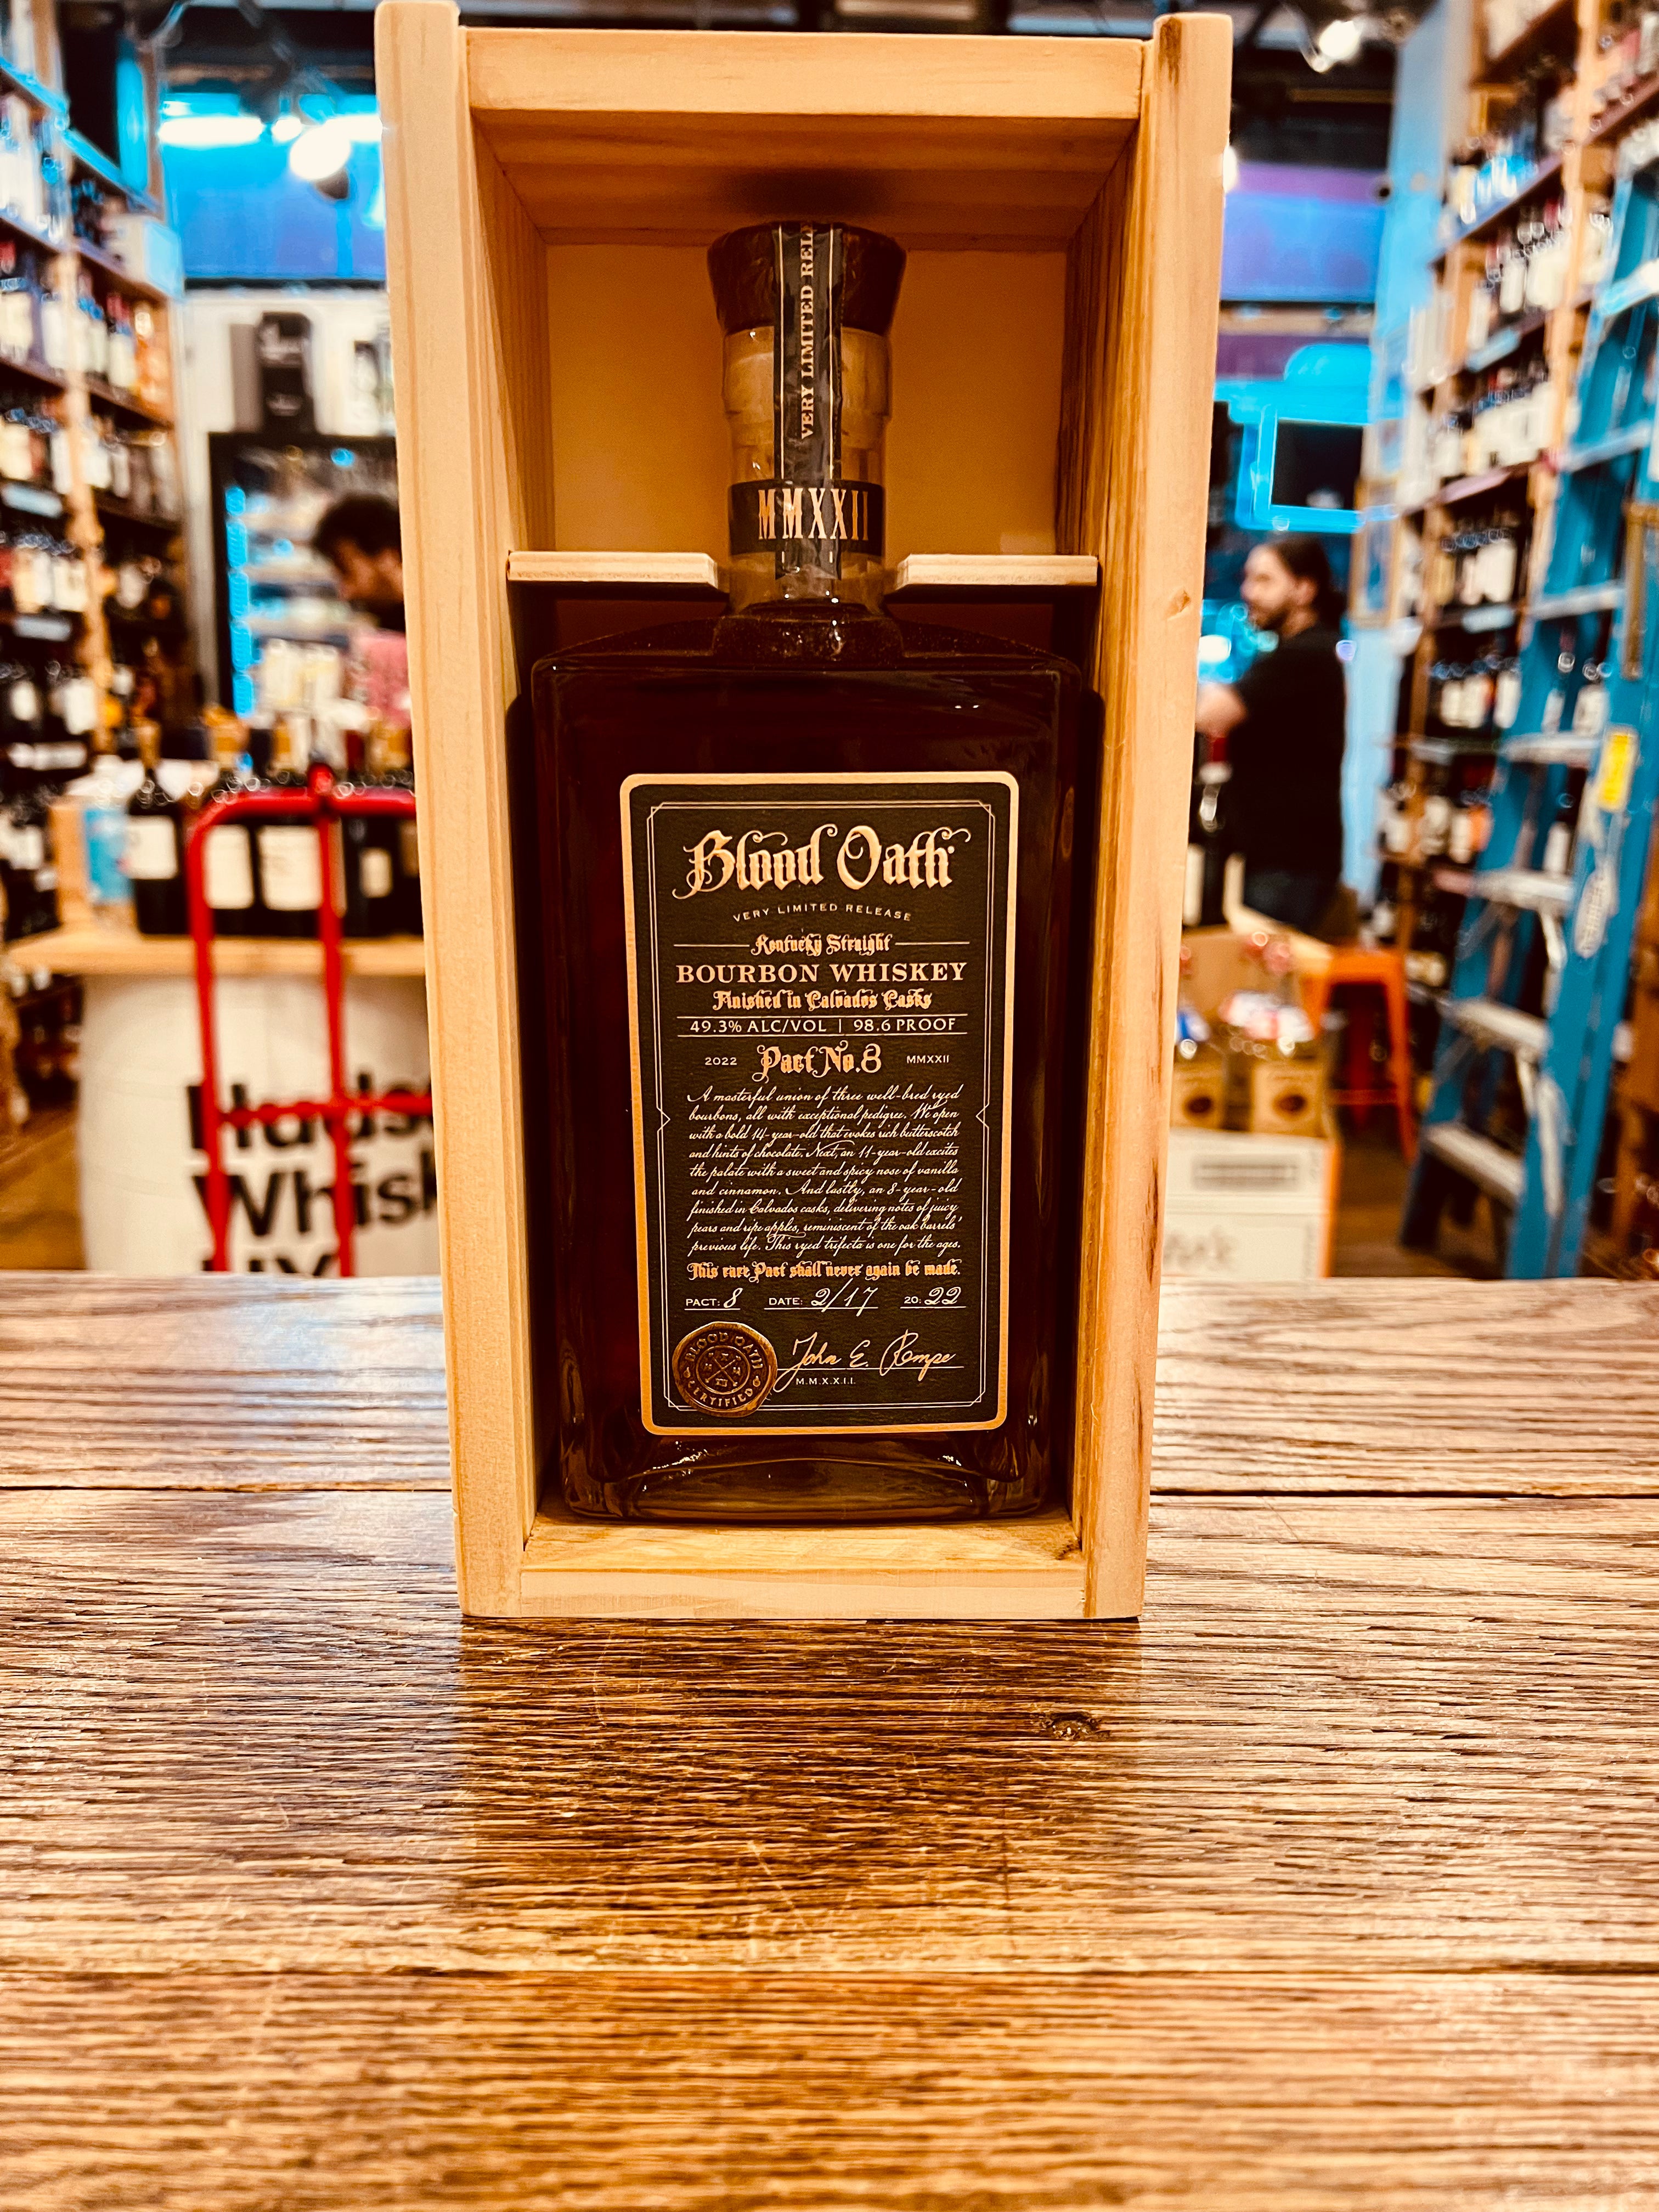 Blood Oath Bourbon Whiskey Pact No 8 750mL a squared clear bottle inside of a wooden square box